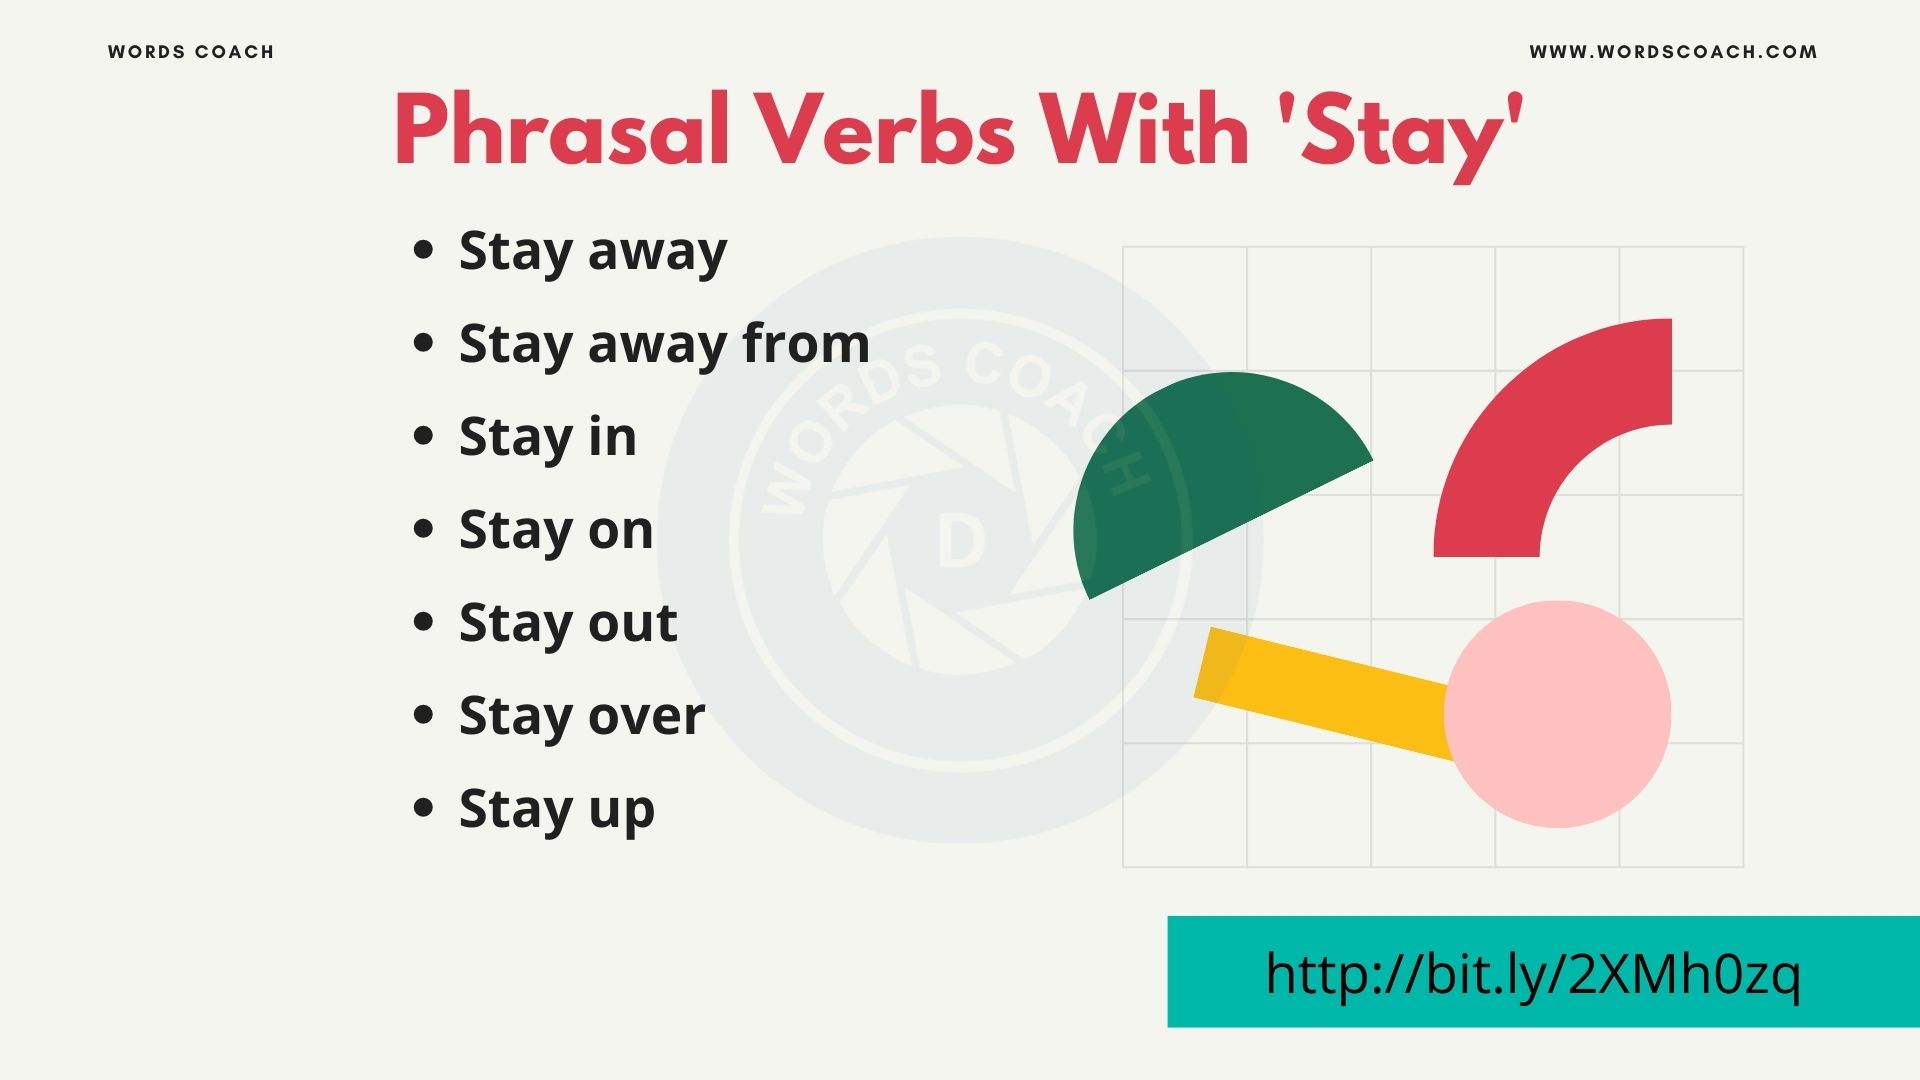 Phrasal Verbs With 'Stay' - wordscoach.com